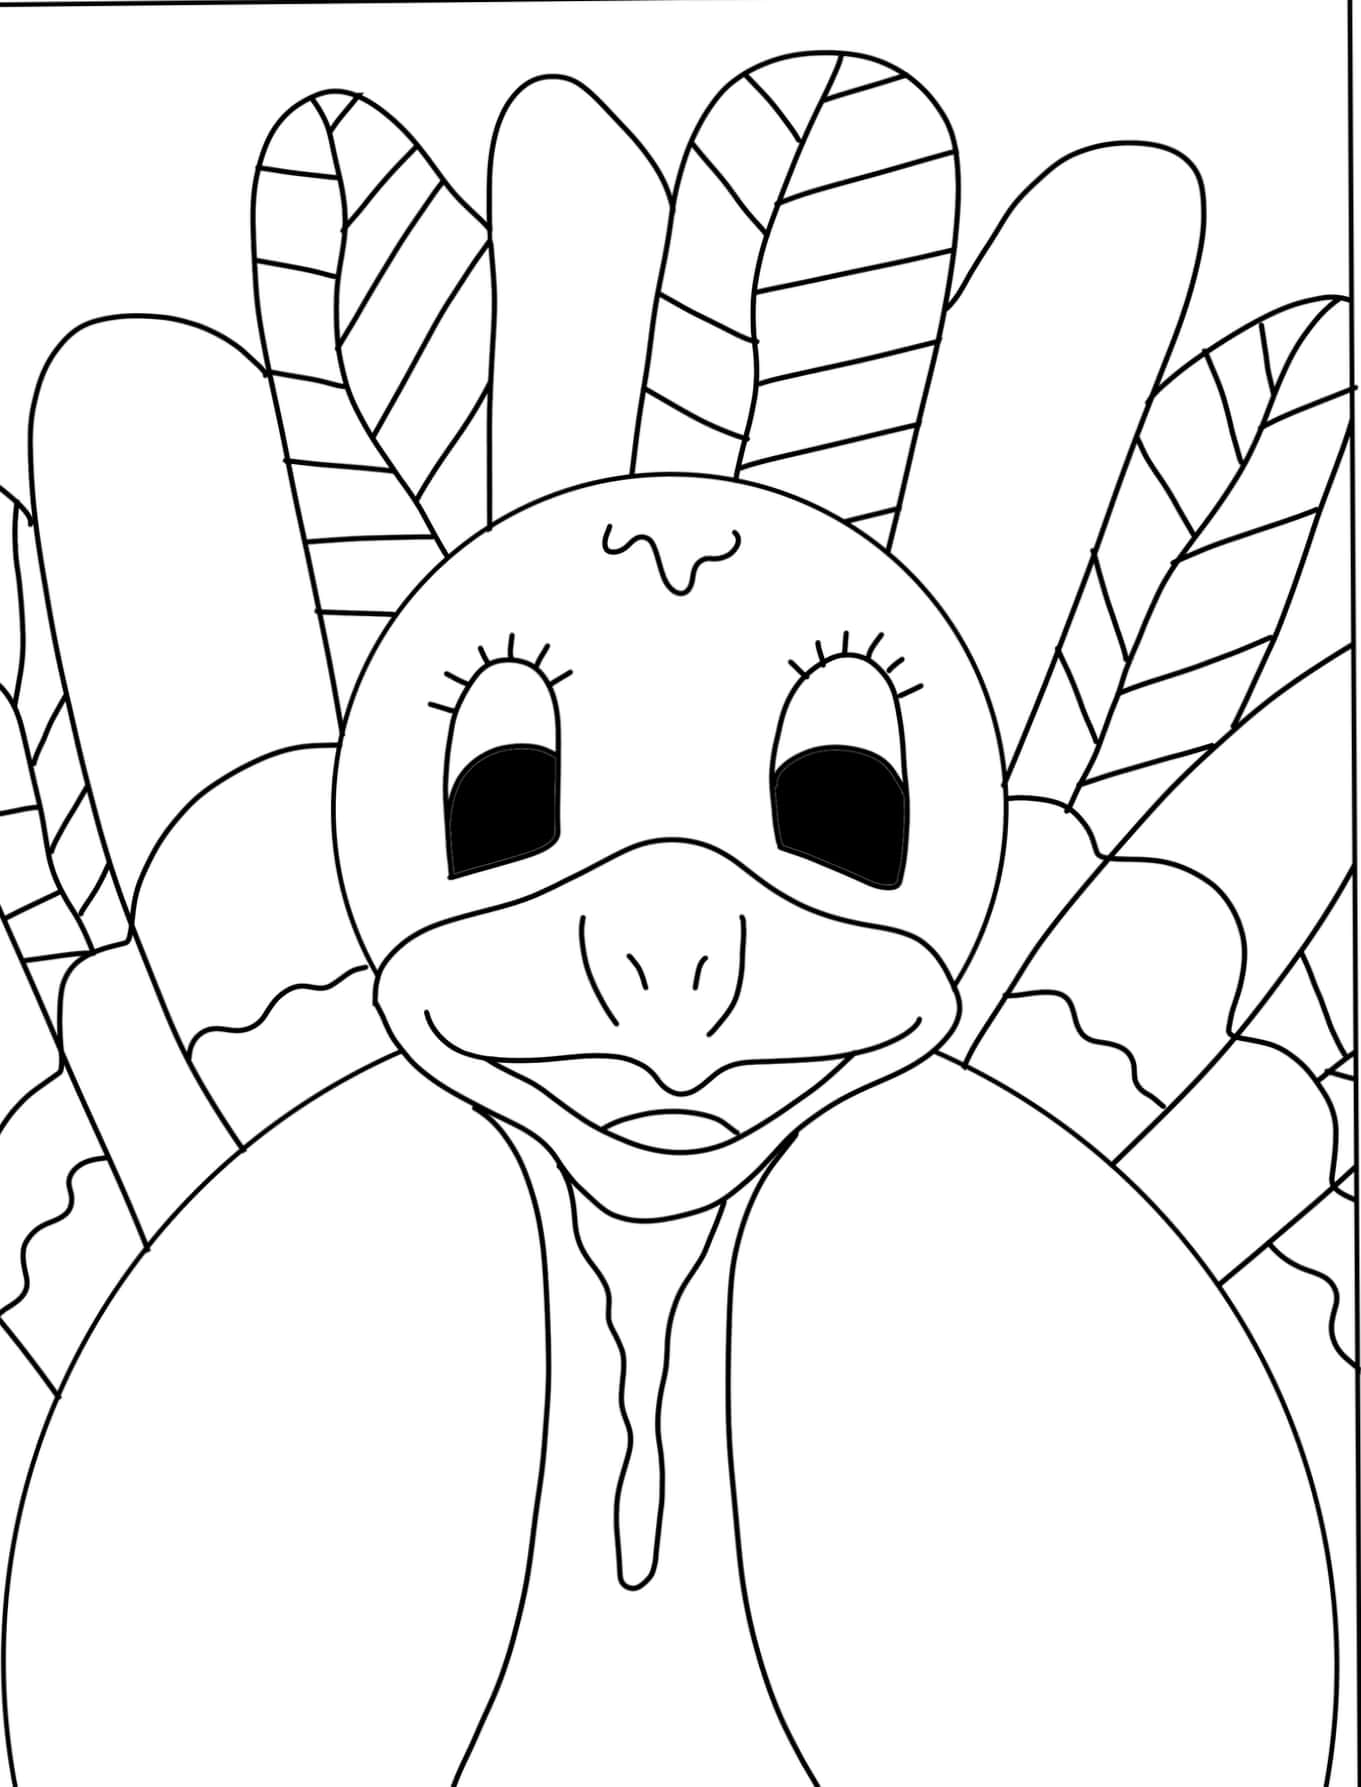 Get into the festive spirit with our Thanksgiving Coloring Pictures